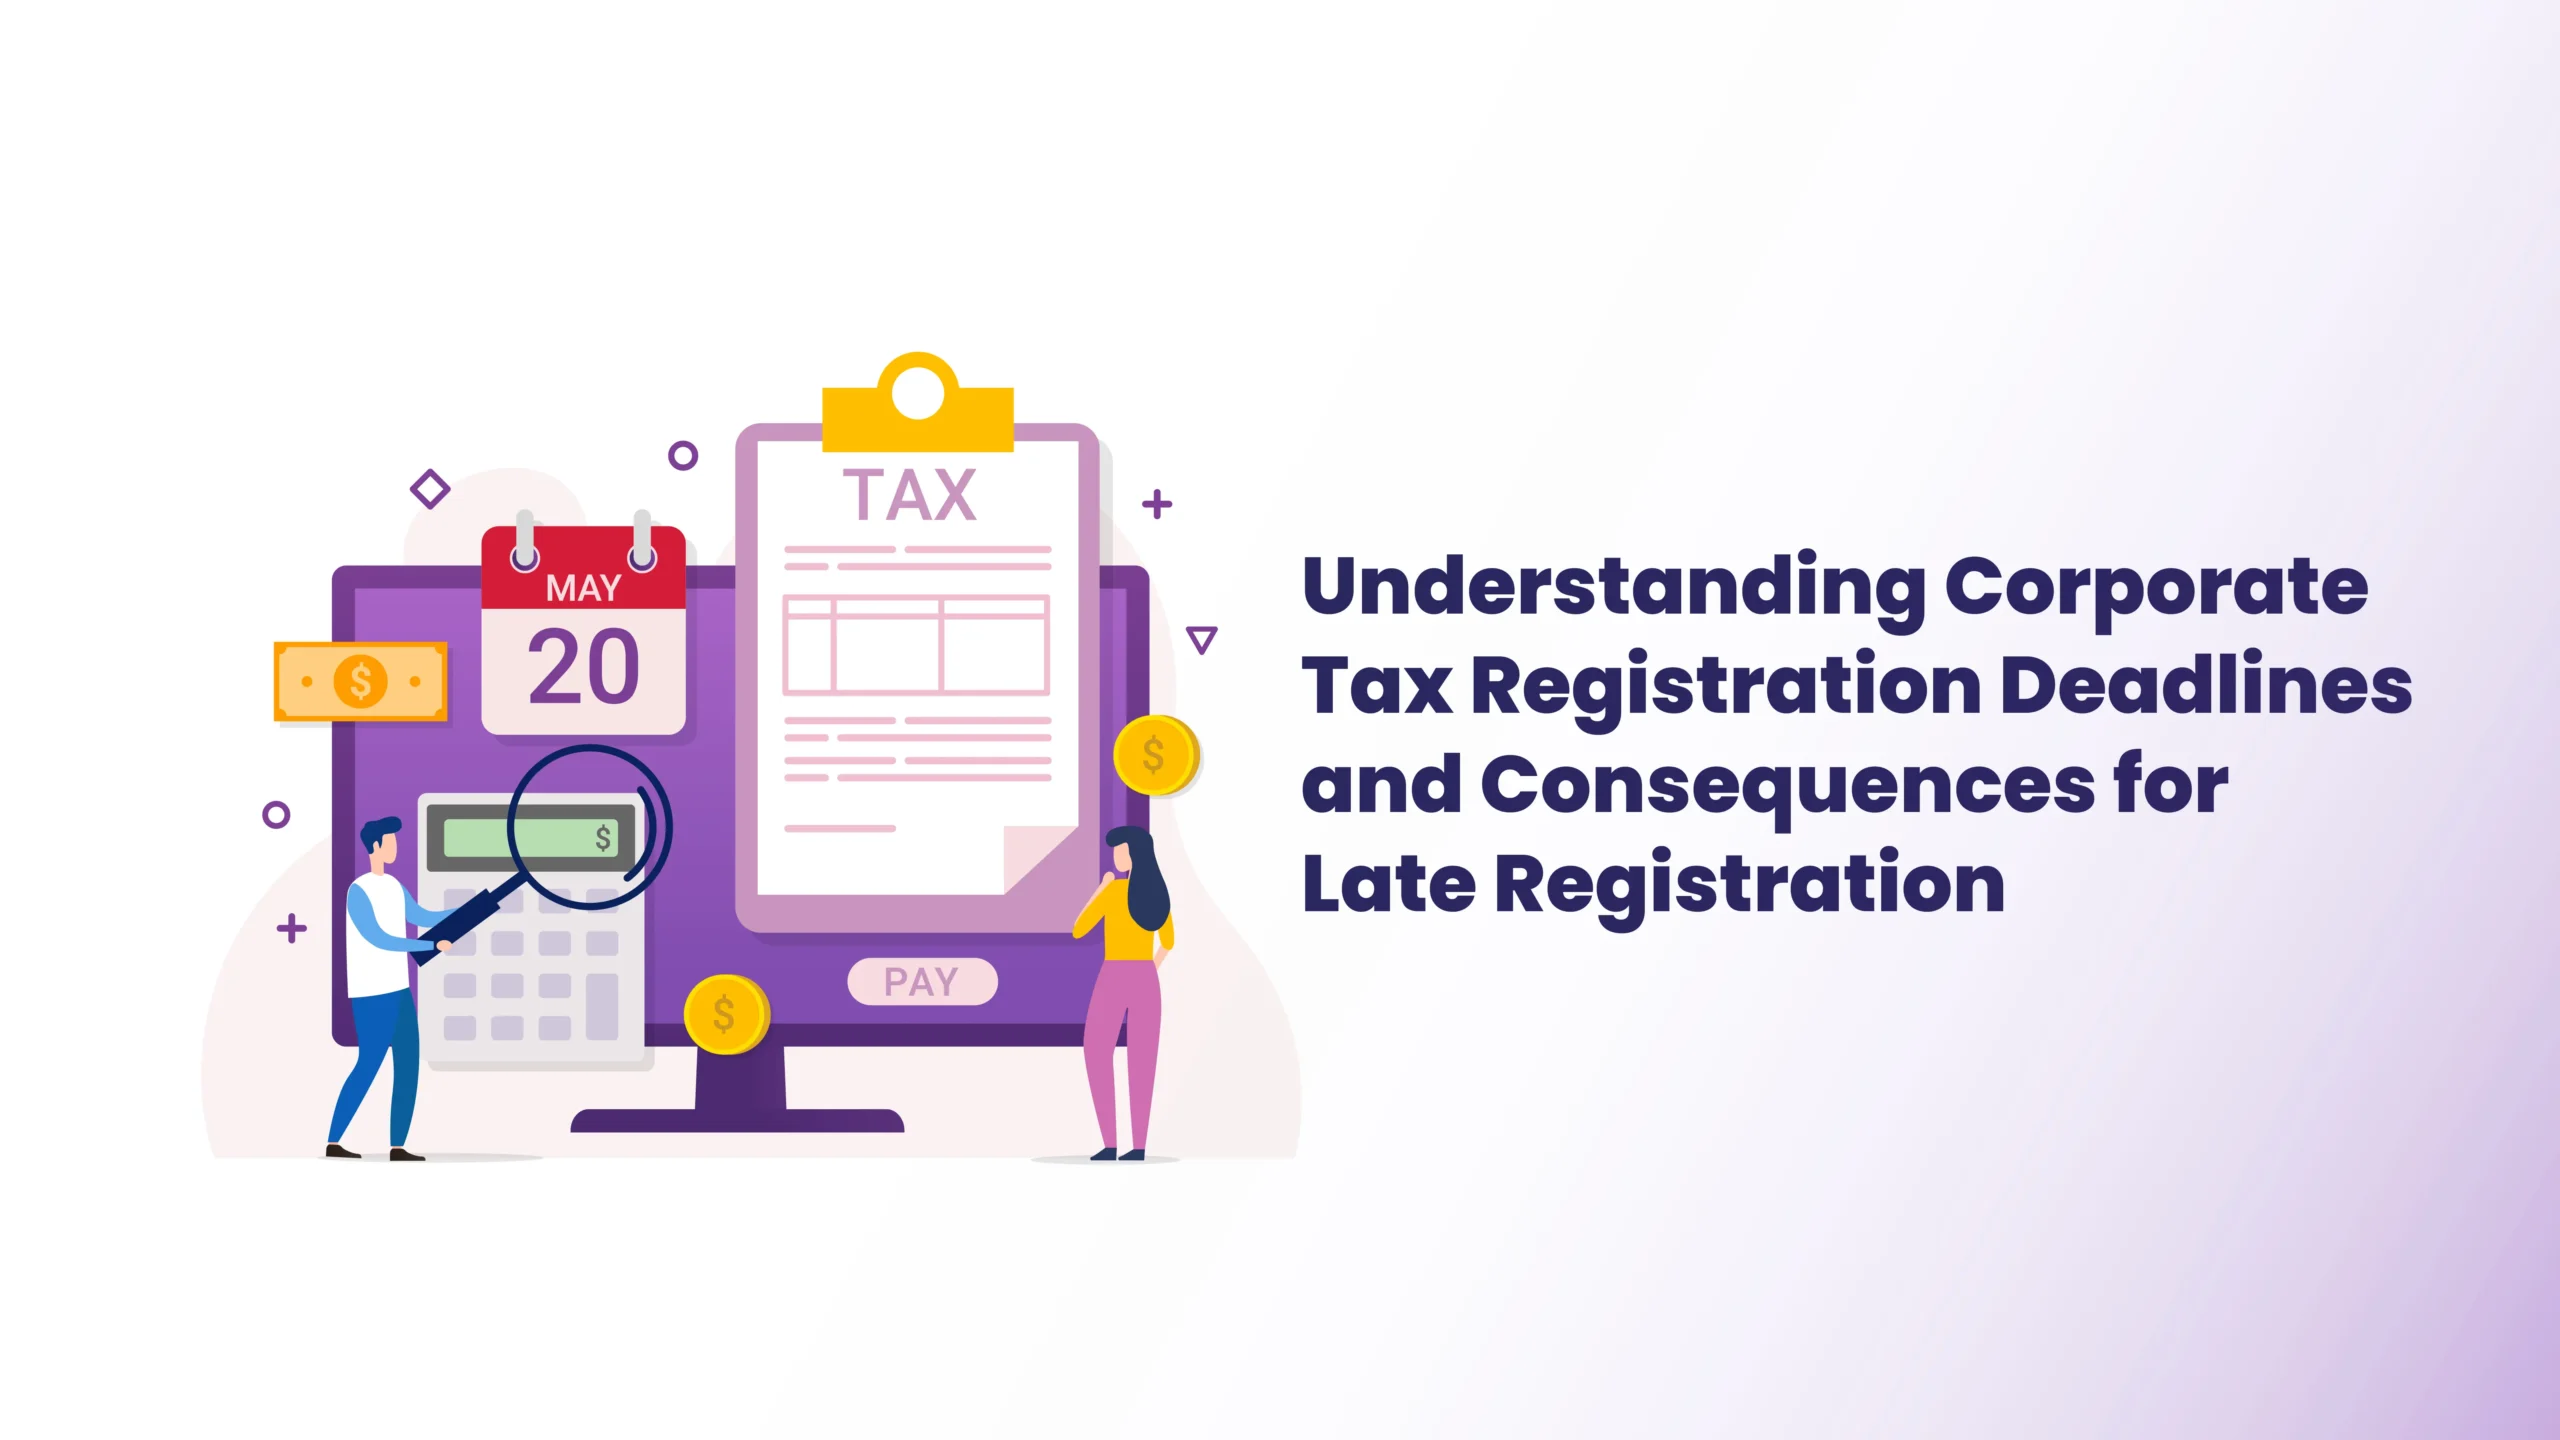 Corporate Tax Registration Deadlines and Consequences for Late Registration